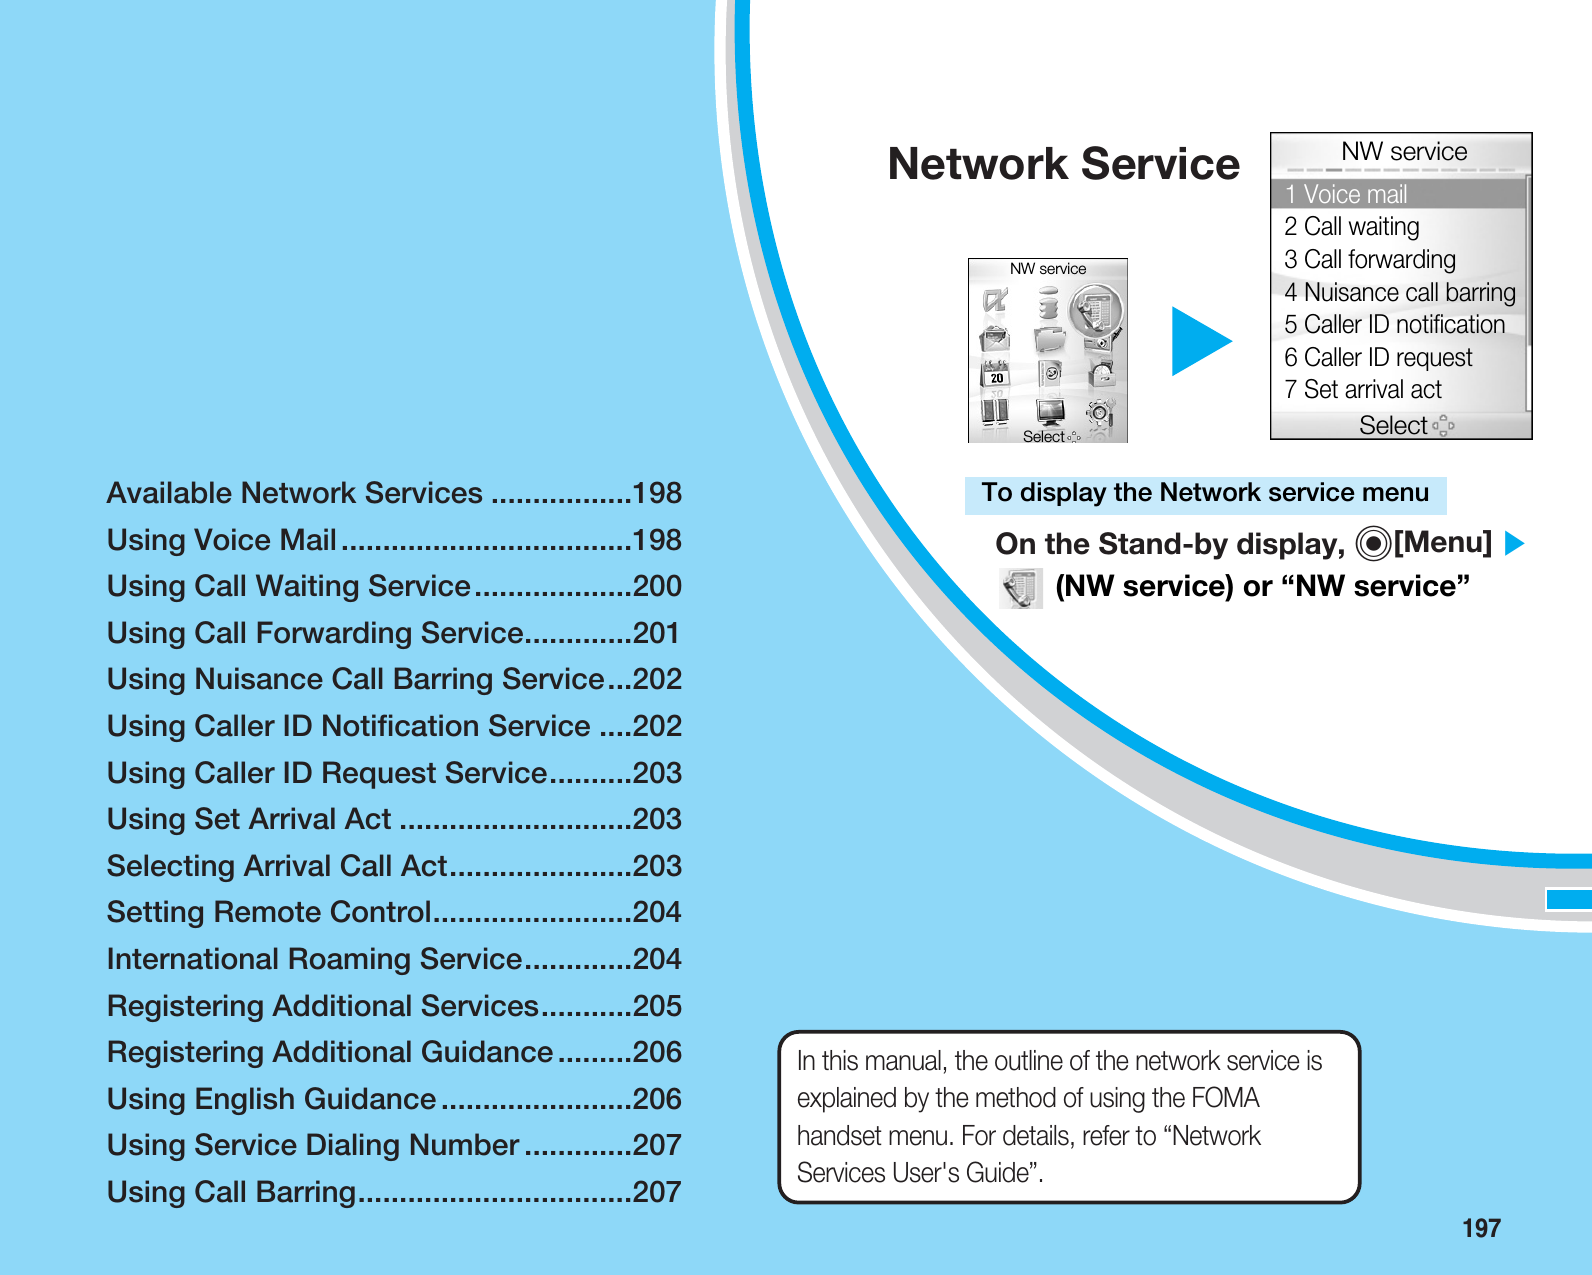 197Available Network Services .................198Using Voice Mail ...................................198Using Call Waiting Service...................200Using Call Forwarding Service.............201Using Nuisance Call Barring Service...202Using Caller ID Notification Service ....202Using Caller ID Request Service..........203Using Set Arrival Act ............................203Selecting Arrival Call Act......................203Setting Remote Control........................204International Roaming Service.............204Registering Additional Services...........205Registering Additional Guidance .........206Using English Guidance .......................206Using Service Dialing Number .............207Using Call Barring.................................207Network ServiceOn the Stand-by display, C[Menu] ](NW service) or “NW service”To display the Network service menuSelectNW service1 Voice mail2 Call waiting3 Call forwarding4 Nuisance call barring5 Caller ID notification6 Caller ID request7 Set arrival actSelectNW serviceIn this manual, the outline of the network service isexplained by the method of using the FOMAhandset menu. For details, refer to “NetworkServices User&apos;s Guide”.